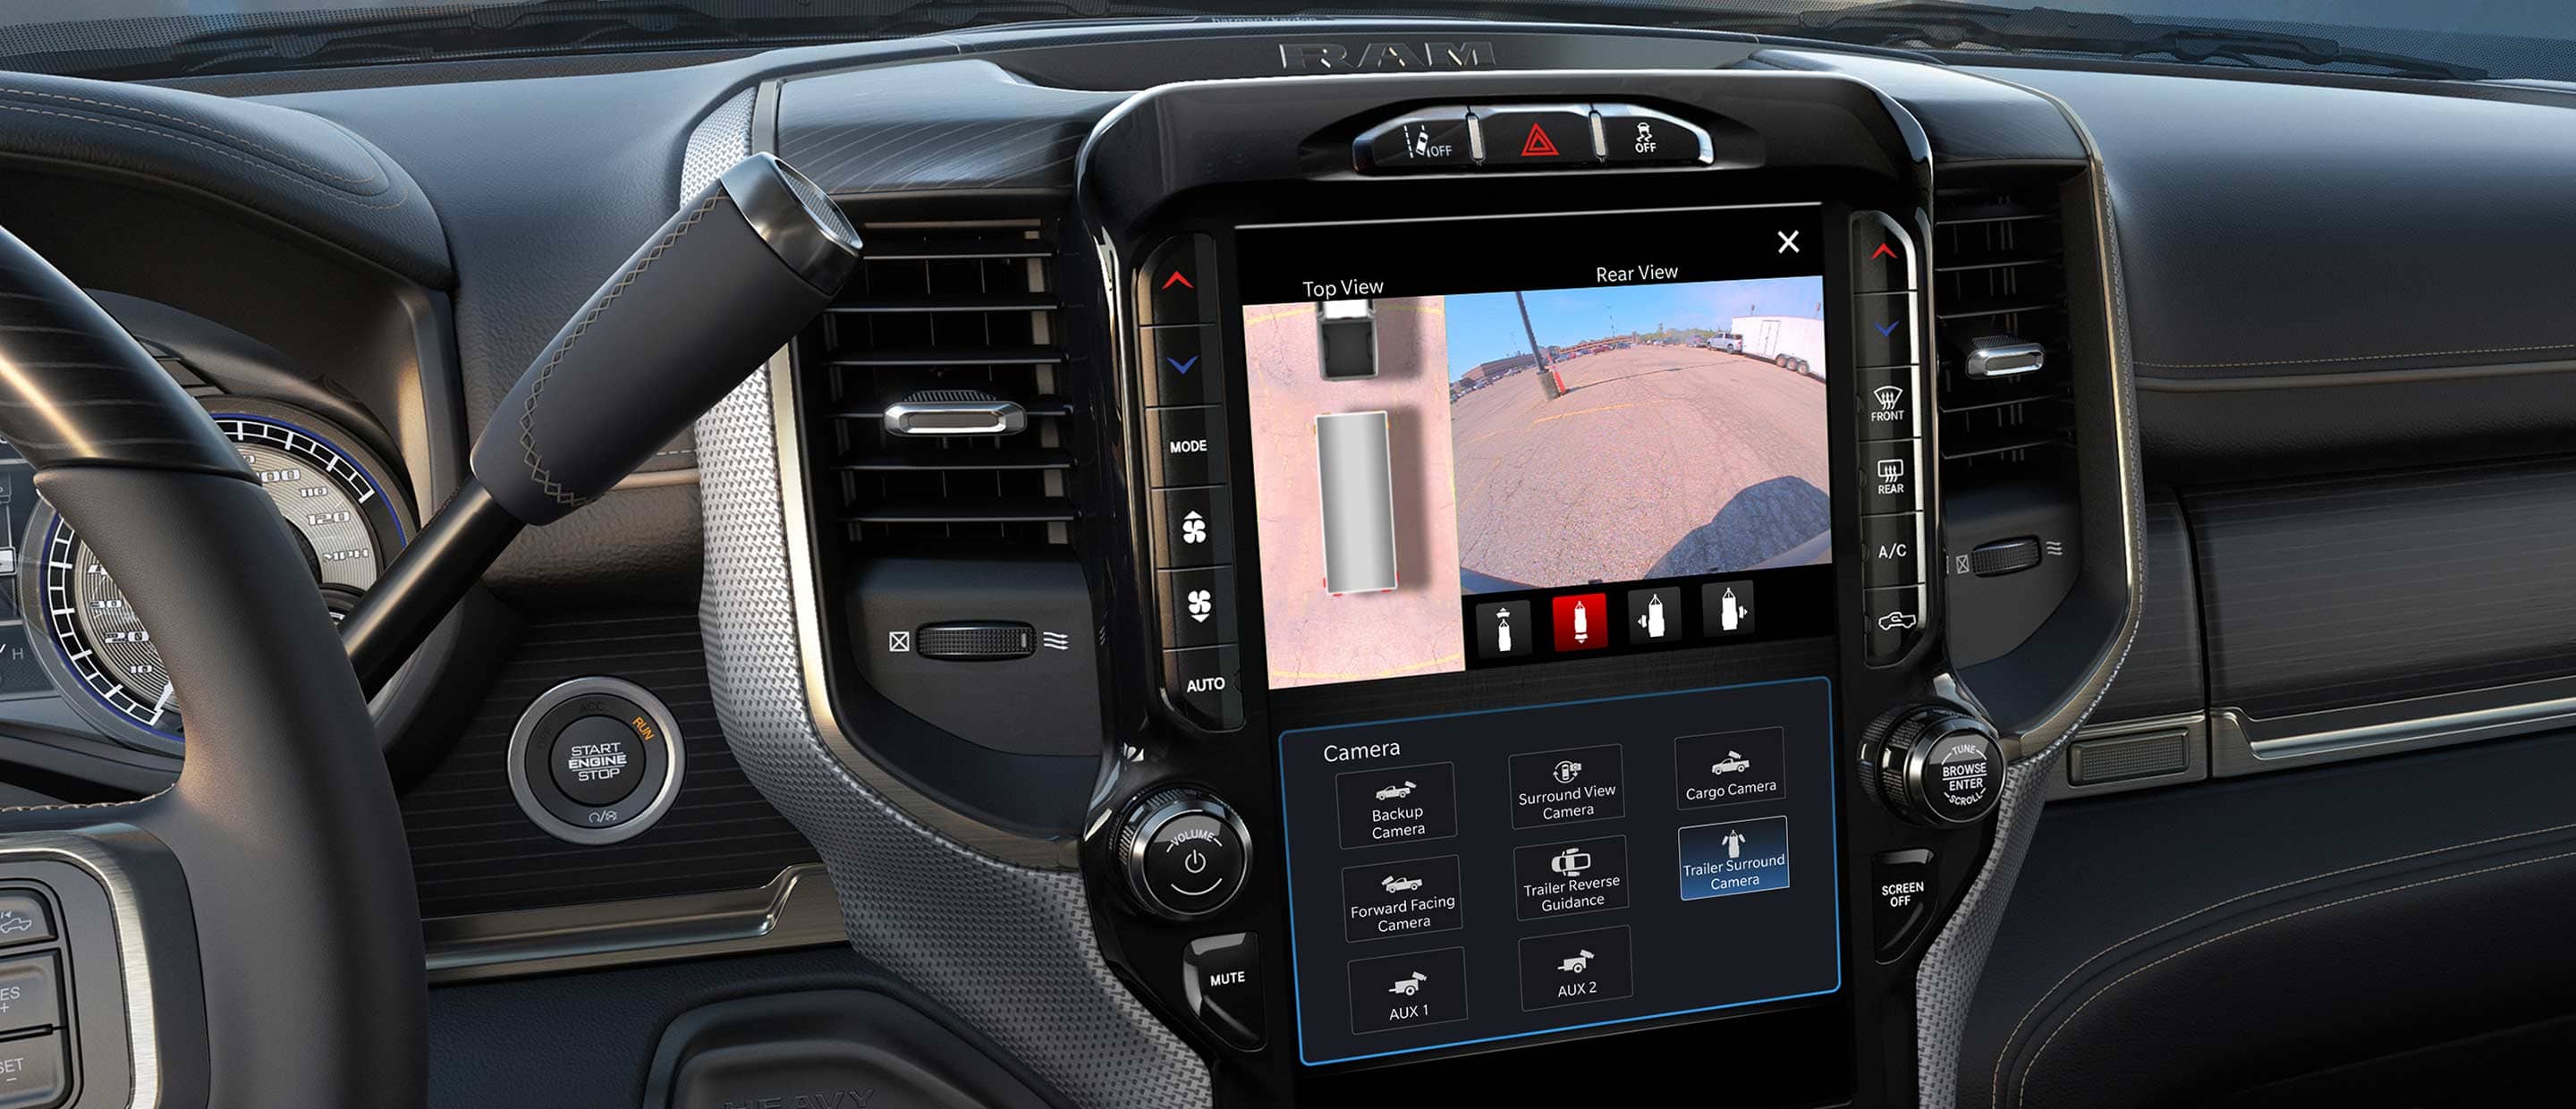 The touchscreen in the 2022 Ram 2500 with a split screen showing both the trailer top view and rear view.